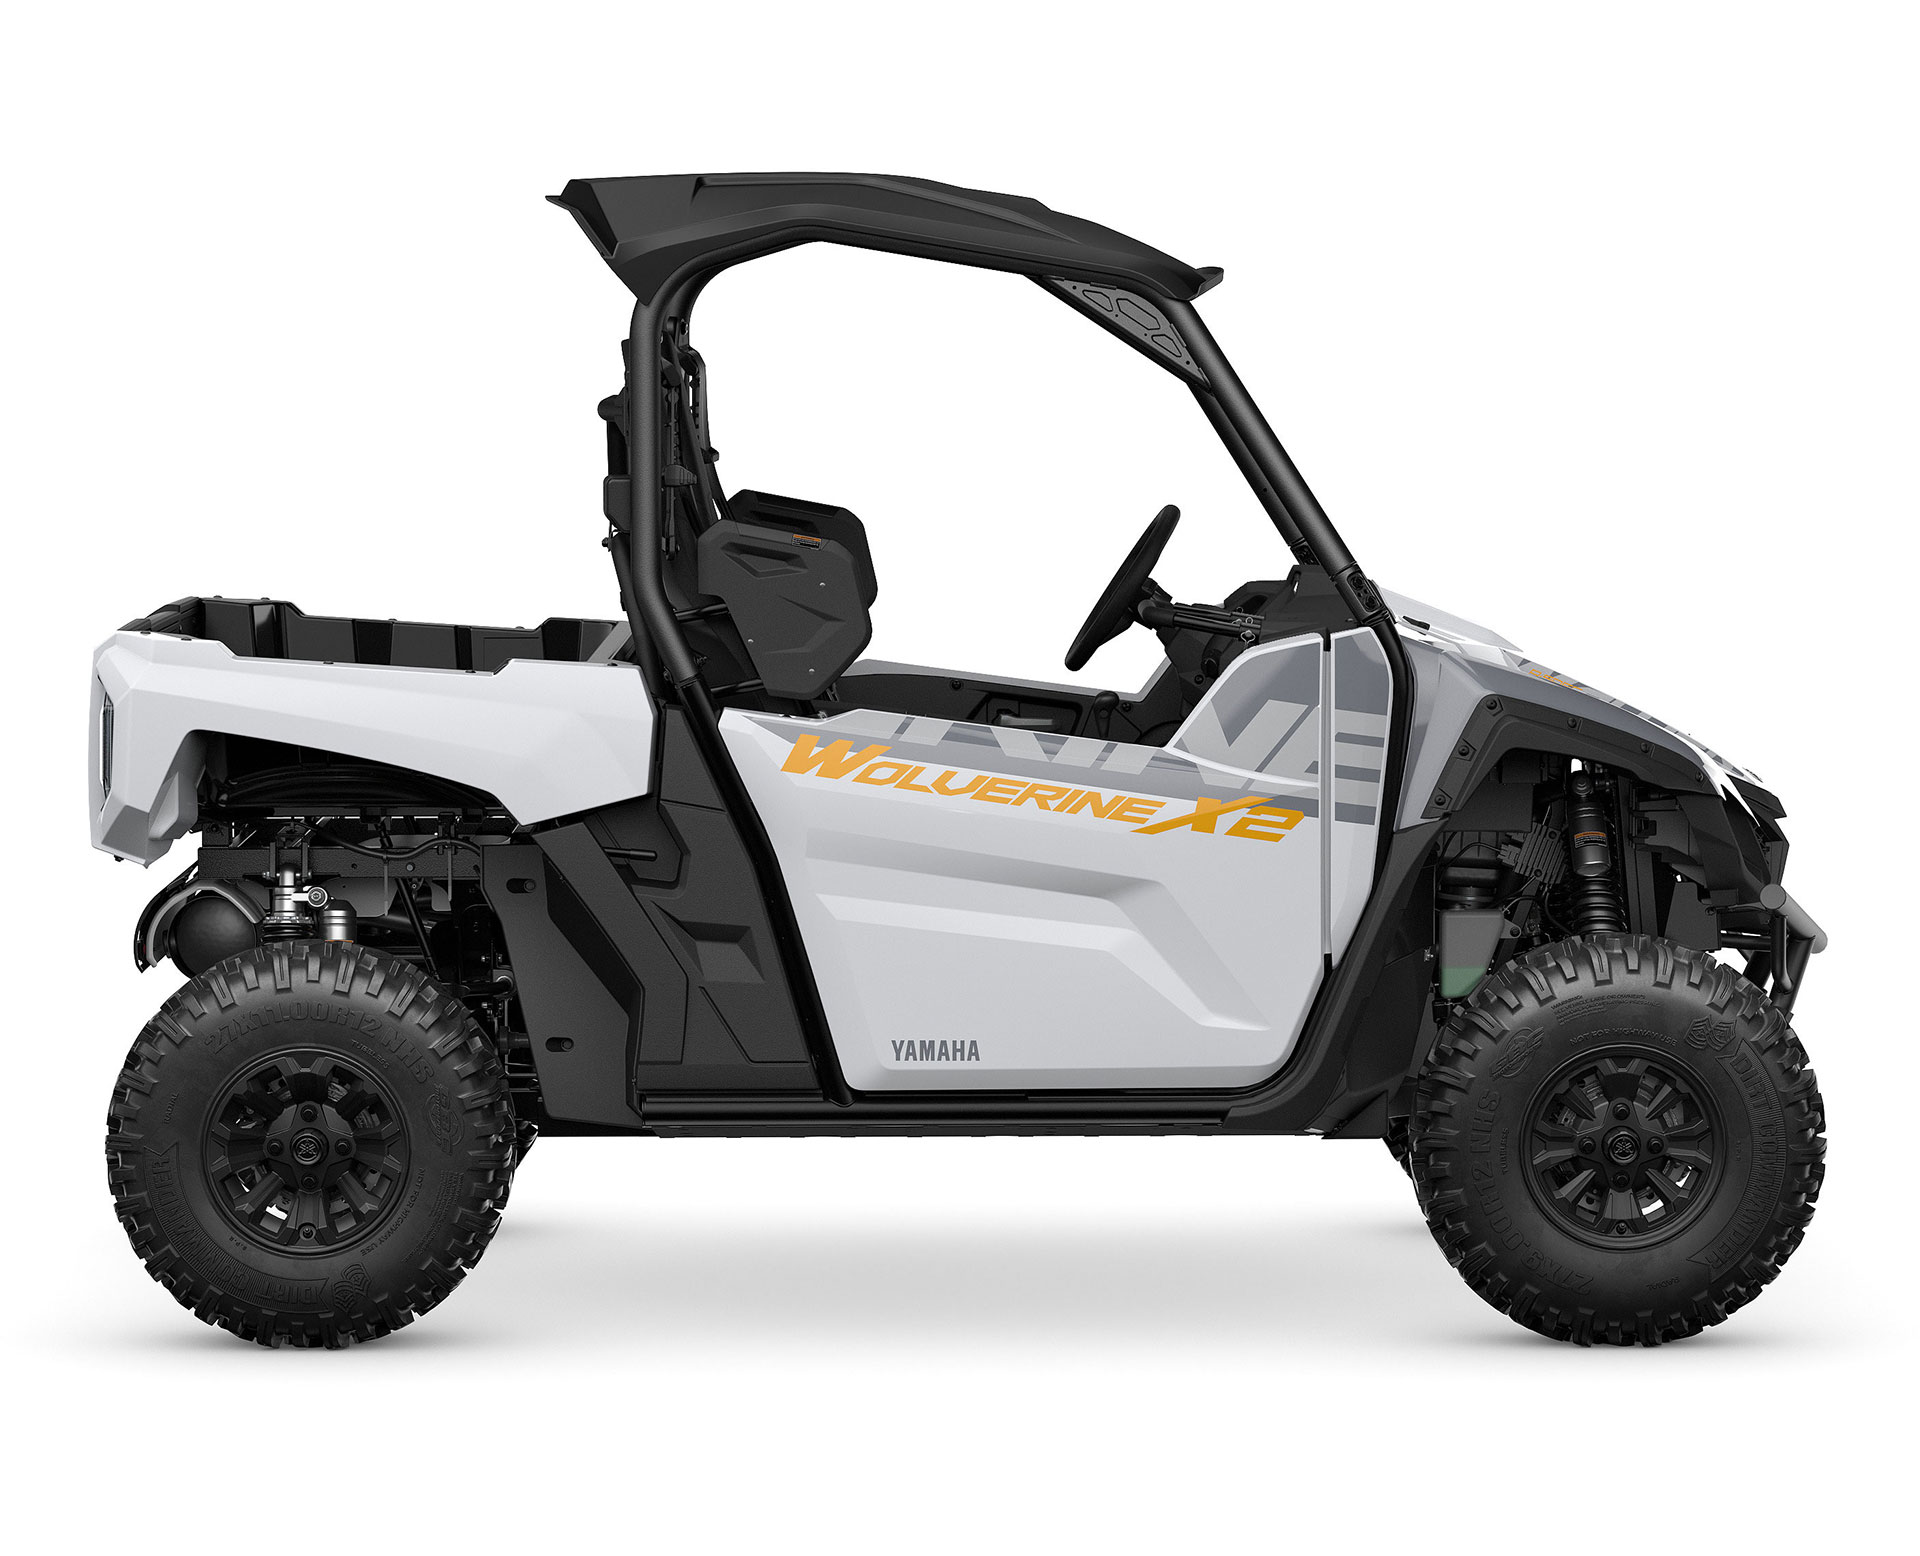 Thumbnail of your customized 2024 WOLVERINE® X2 850 R-Spec